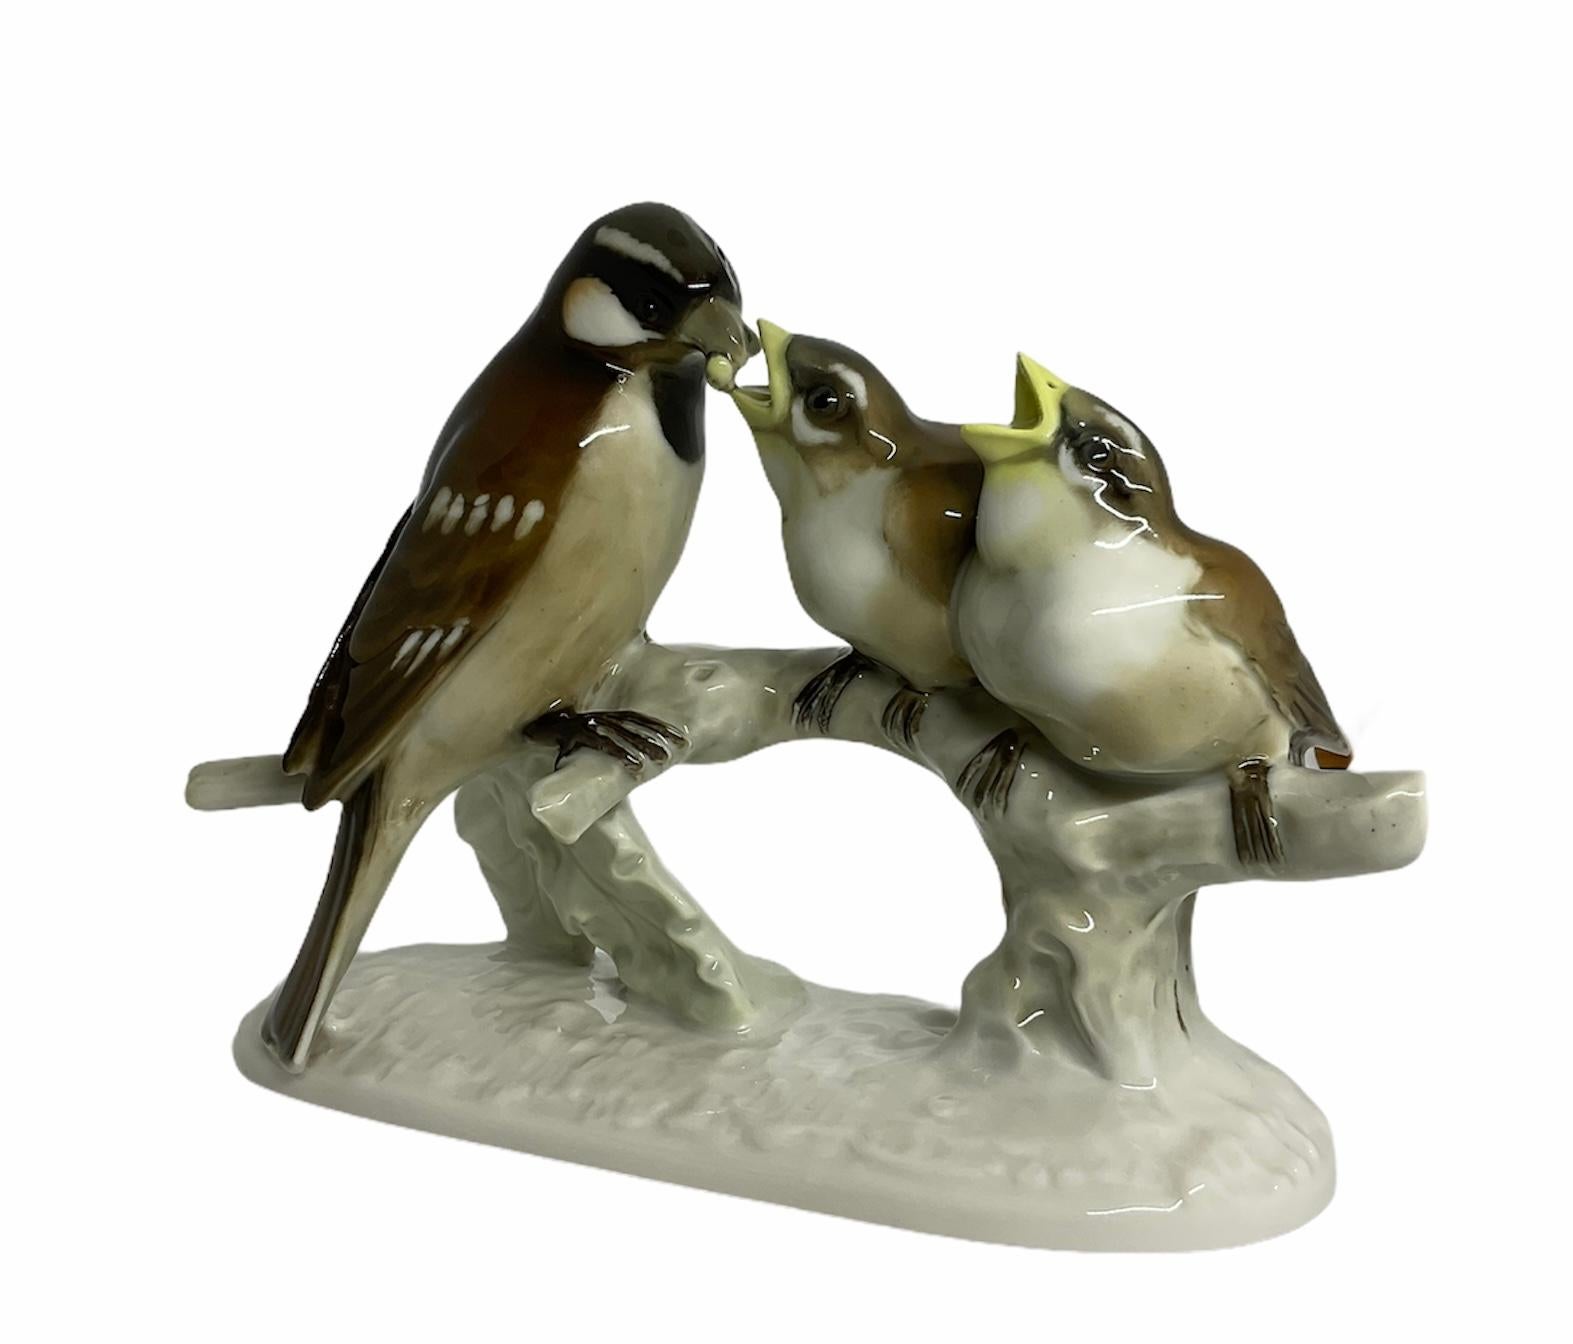 This is a Hutschenreuther porcelain group sculpture/figurine that is depicting a mother sparrow feeding one of her two baby birds. They are hand painted dark chocolate/black in the back and white in the front. The babies’ sparrows peaks are yellow.